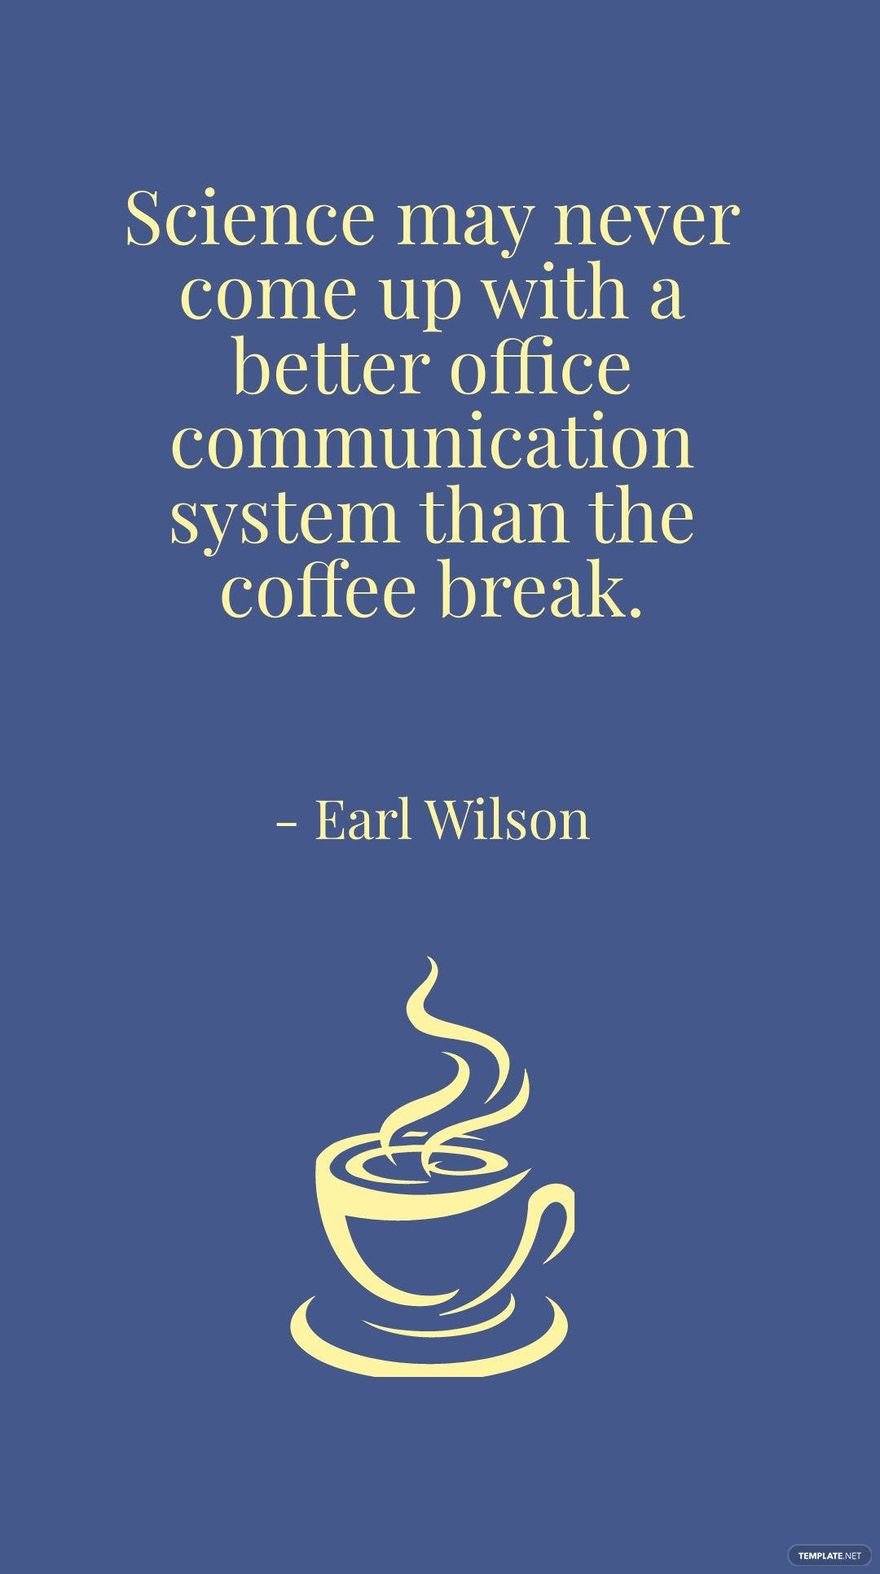 Earl Wilson - Science may never come up with a better office communication system than the coffee break. in JPG